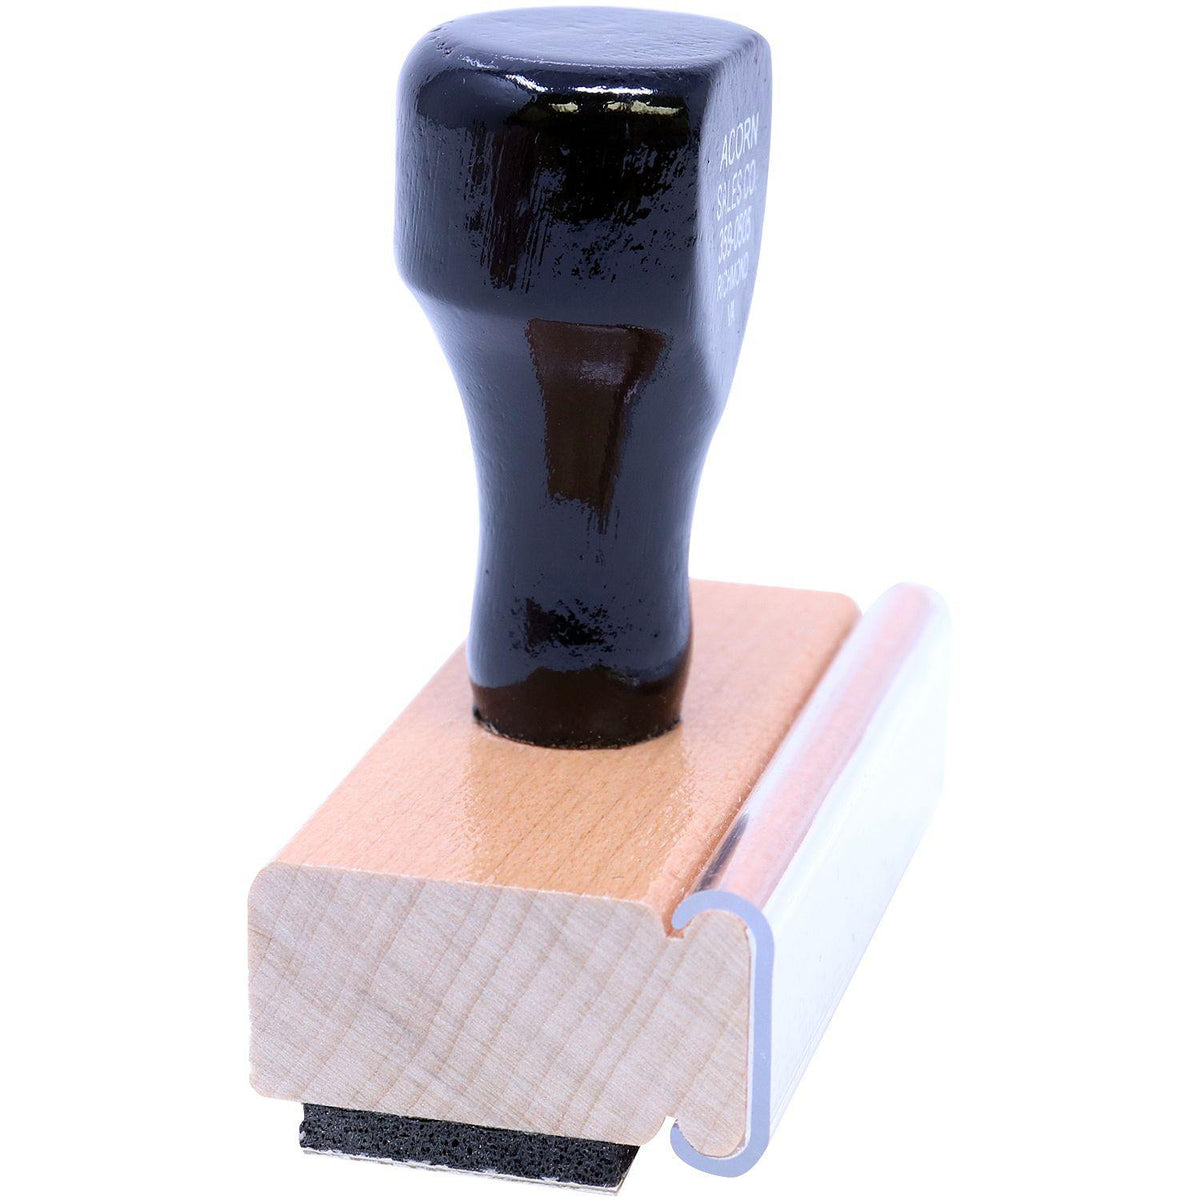 Side View of Cancelado with Box Rubber Stamp at an Angle